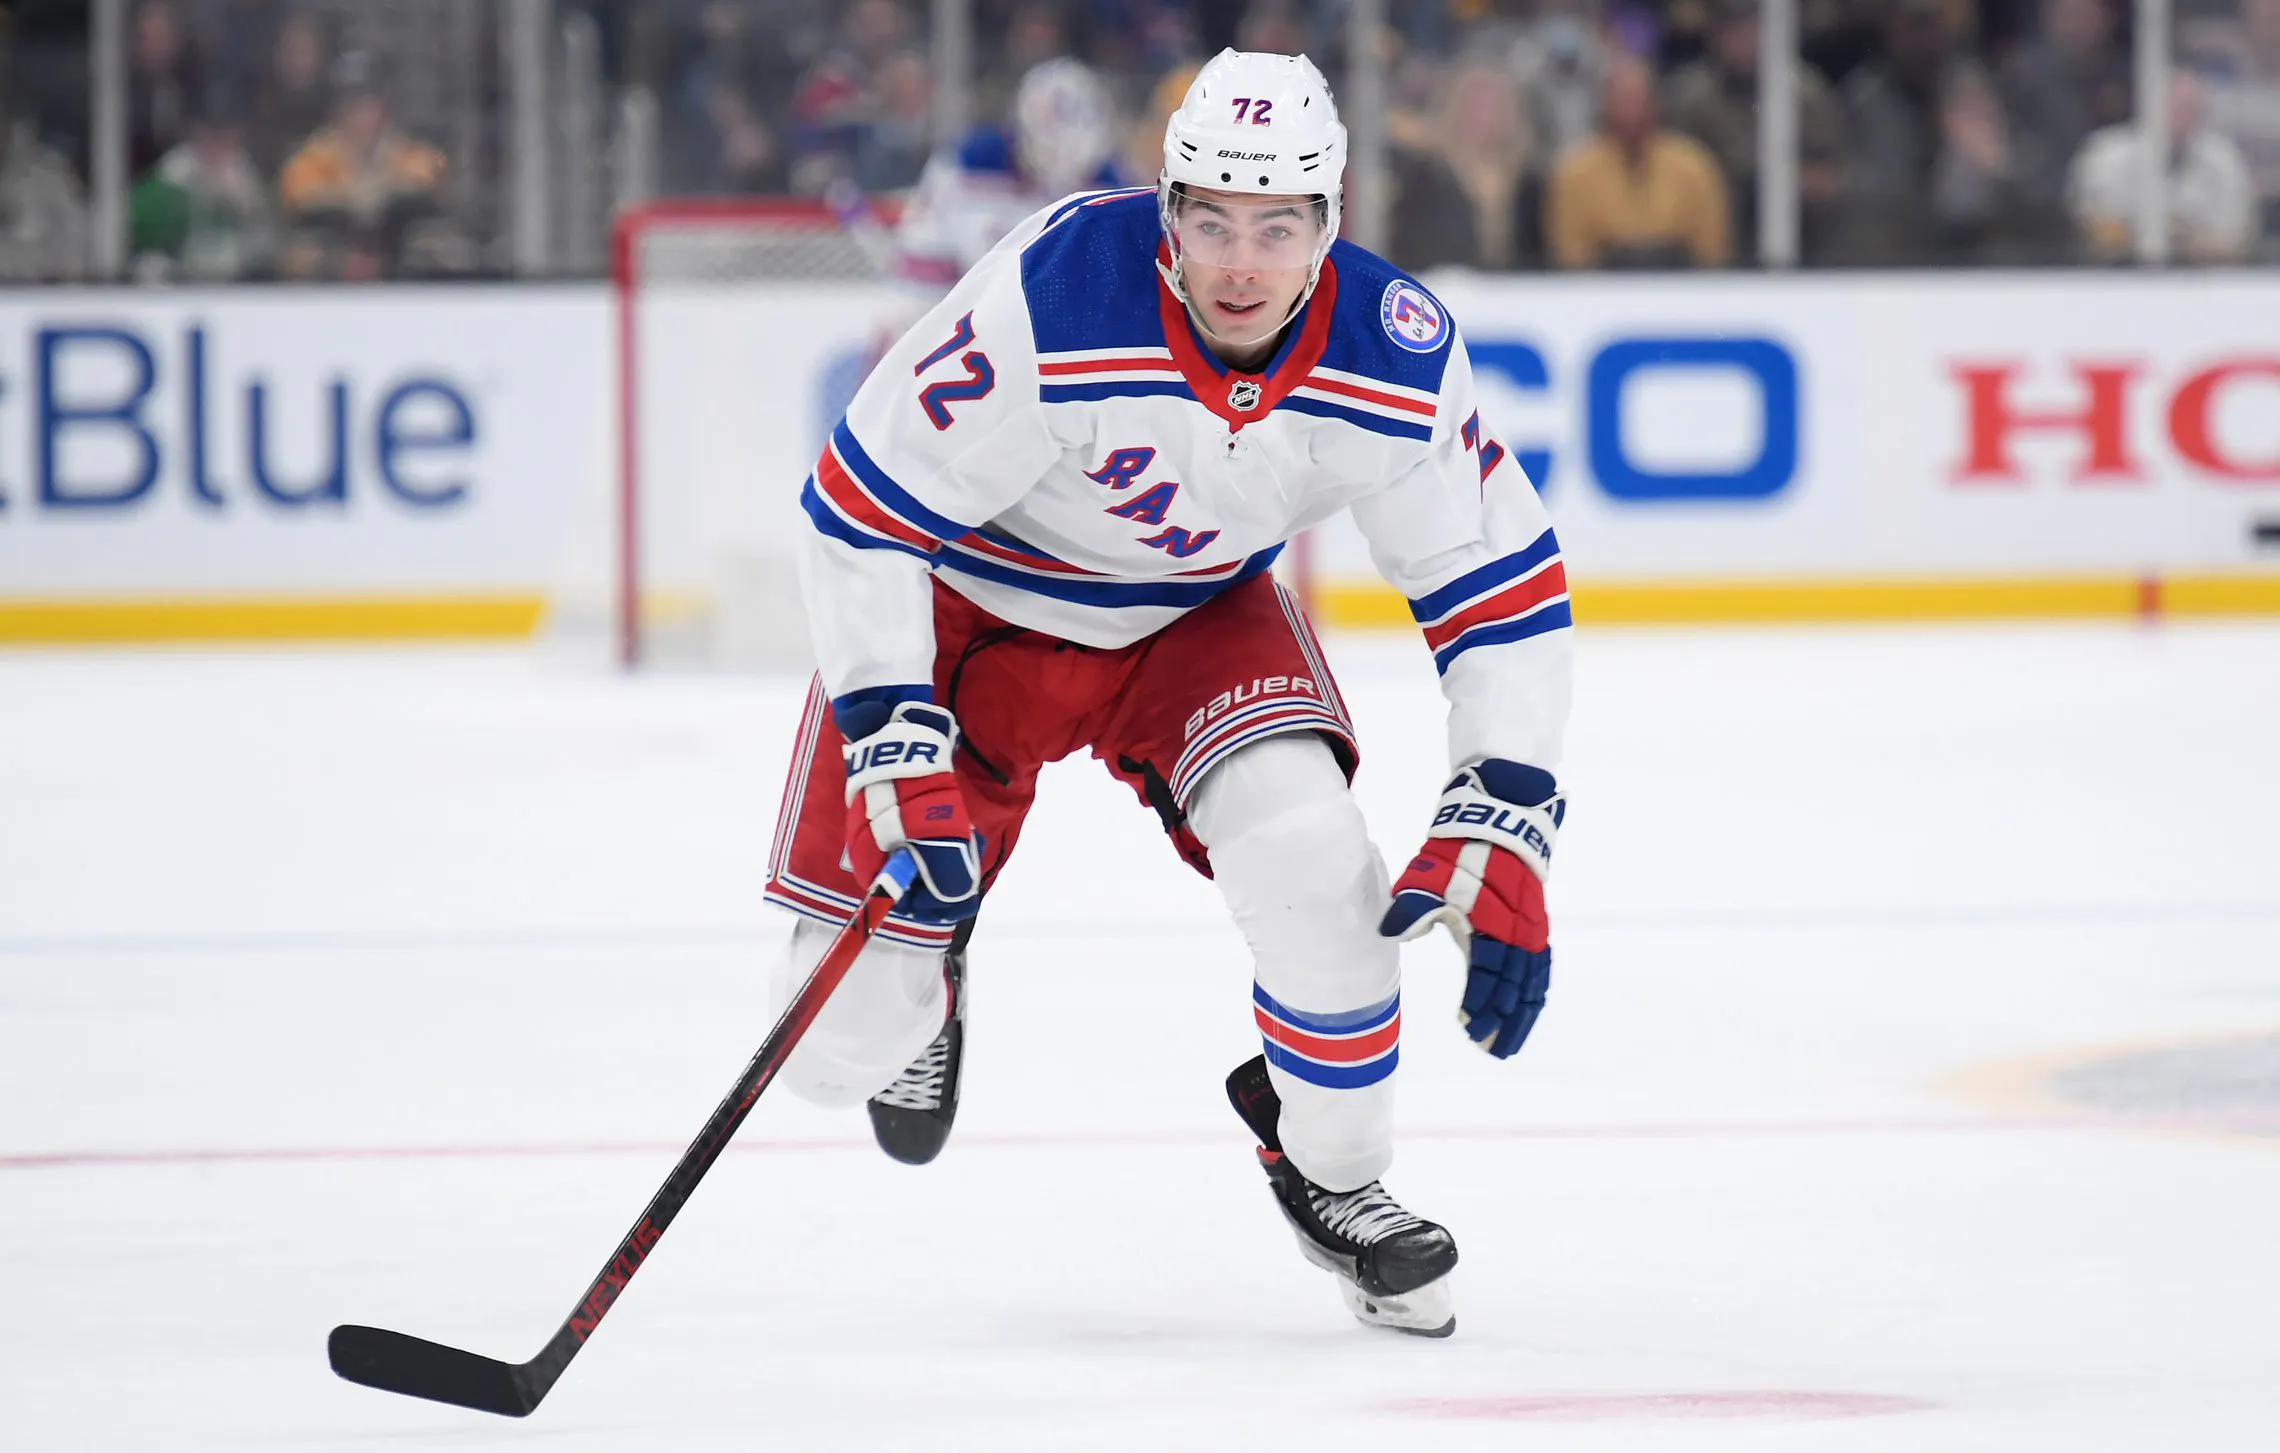 Rangers forward Filip Chytil to miss at least a week with upper-body injury